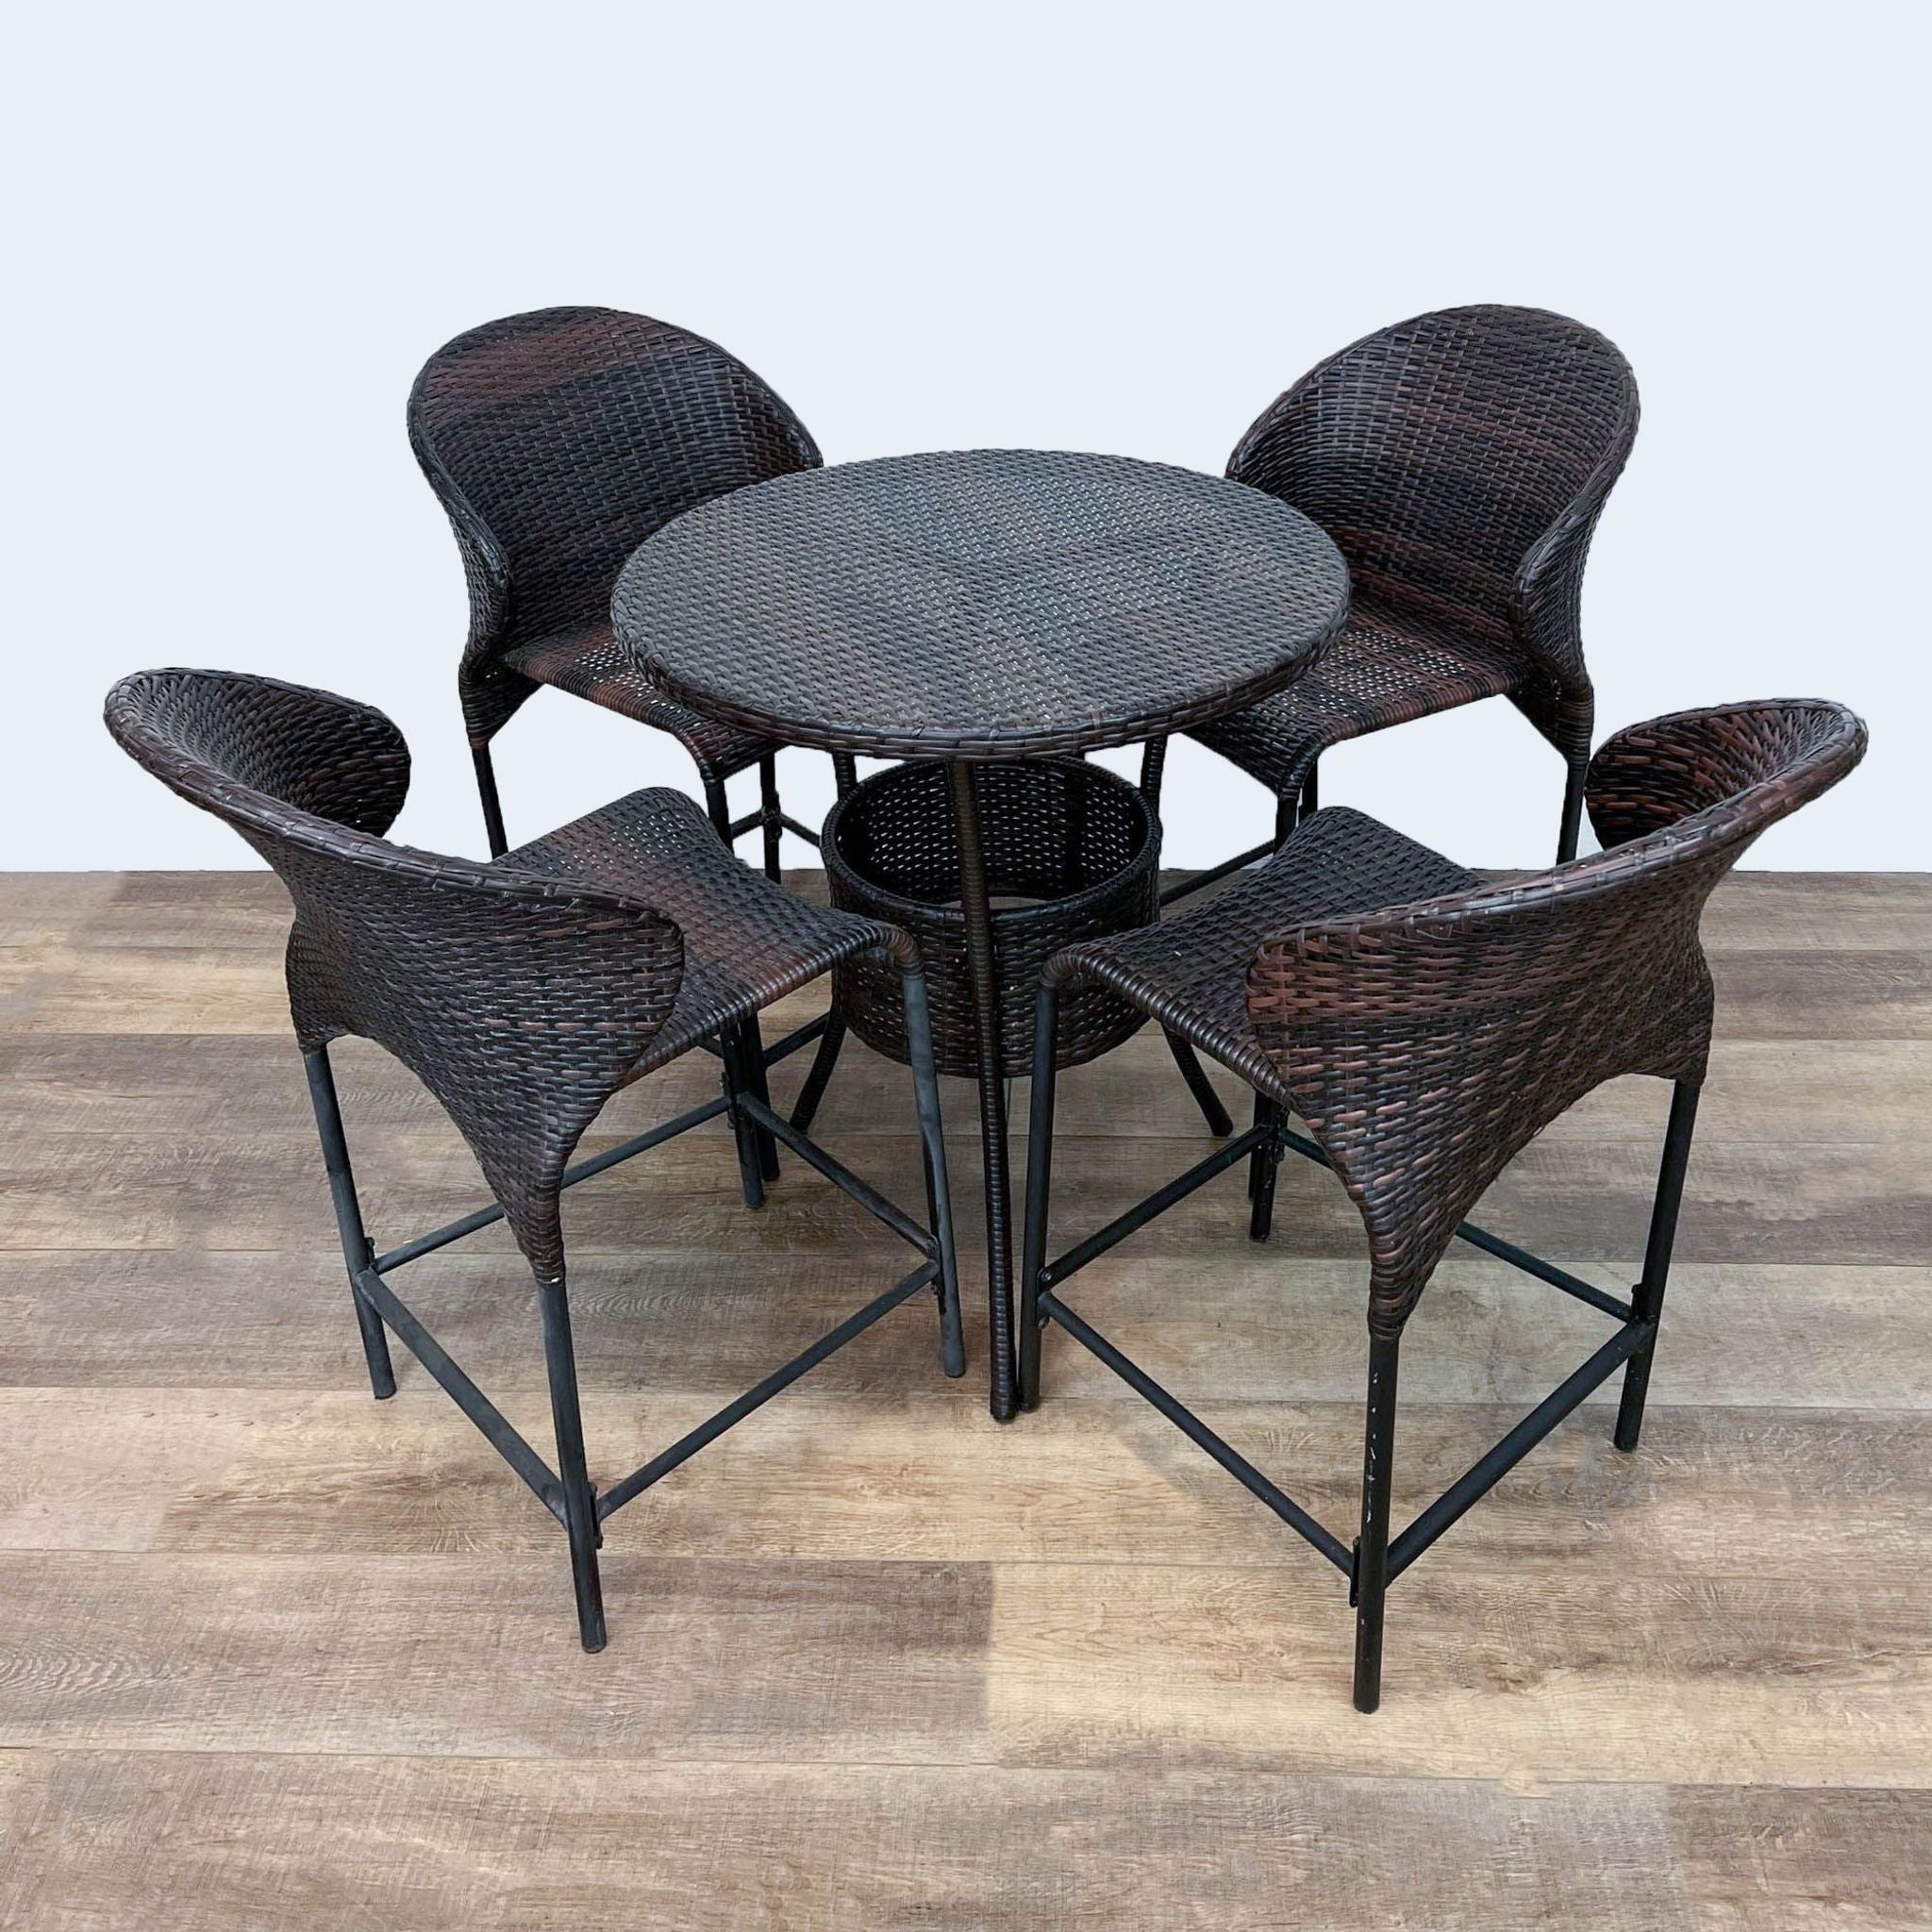 Reperch brand small round resin wicker table with four matching chairs on metal frames, set on a wooden floor.